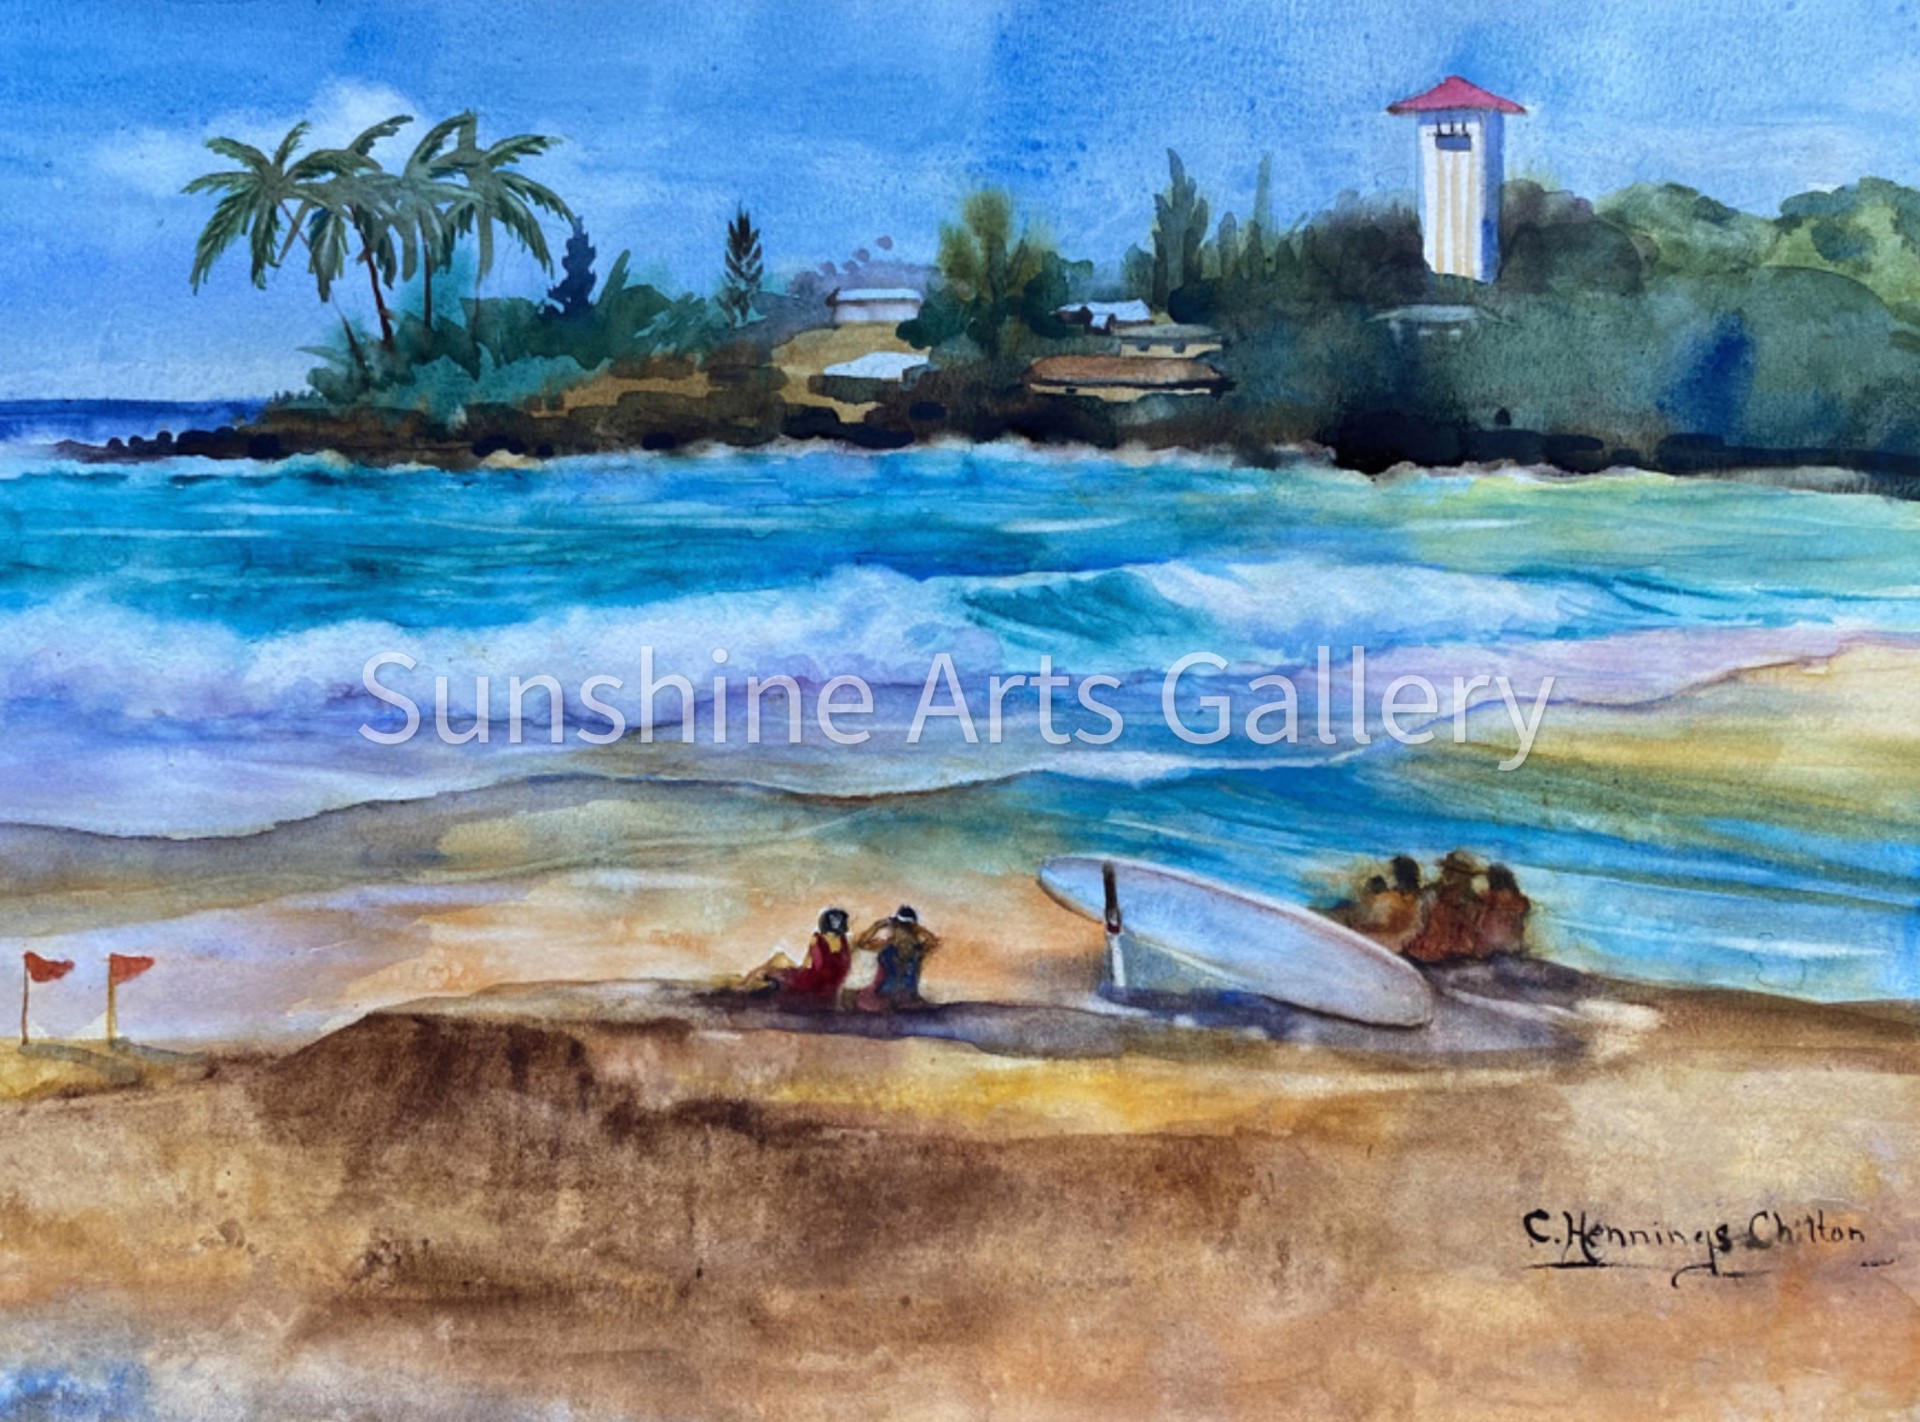 North Shore by Connie Hennings-Chilton